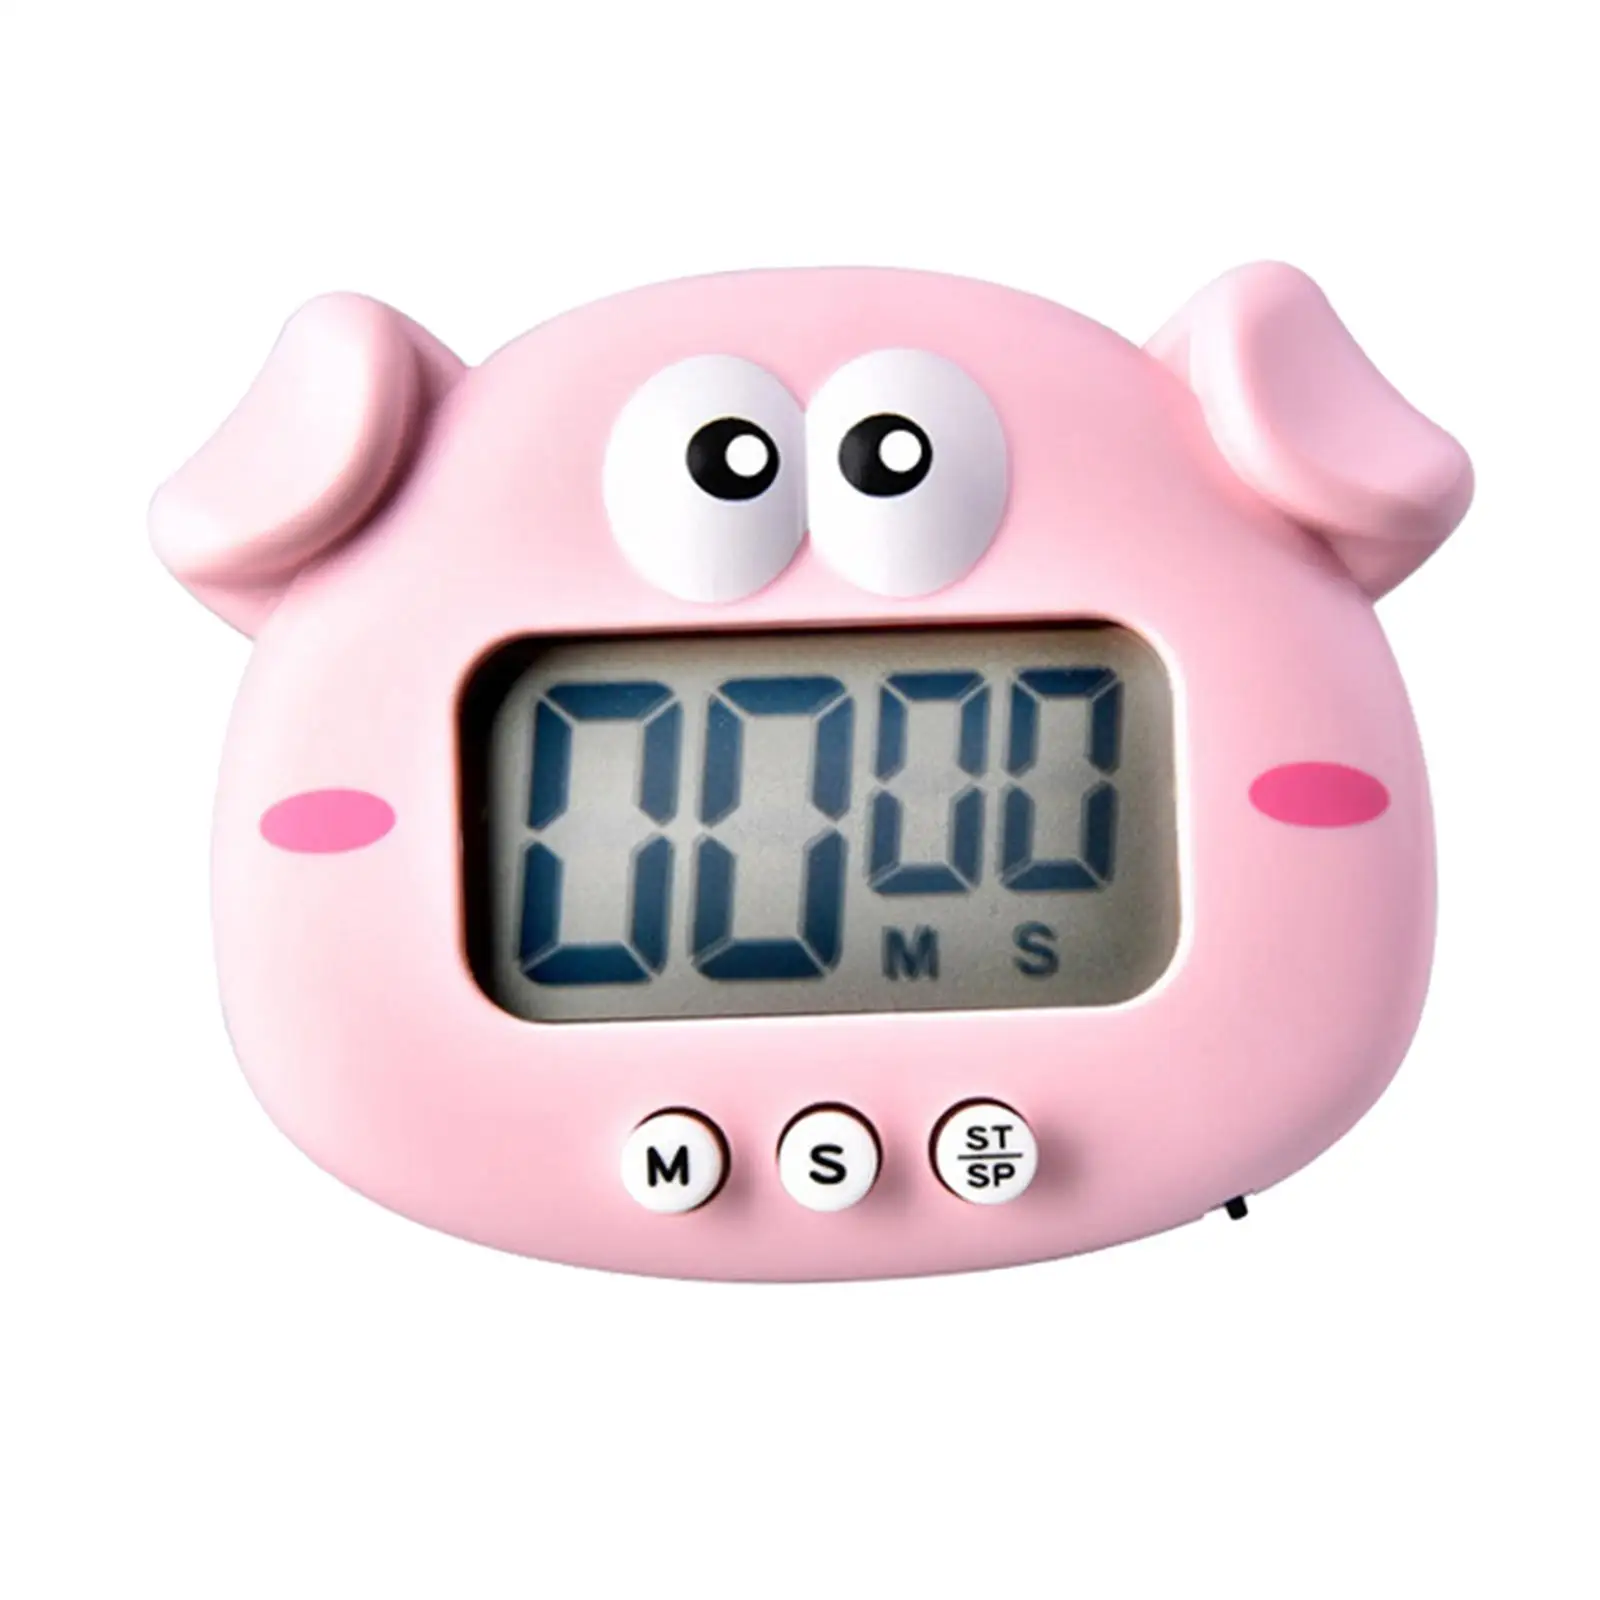 Cute Pig timers Magnetic Decorative Large Screen Digital Timer for Baking Sleeping